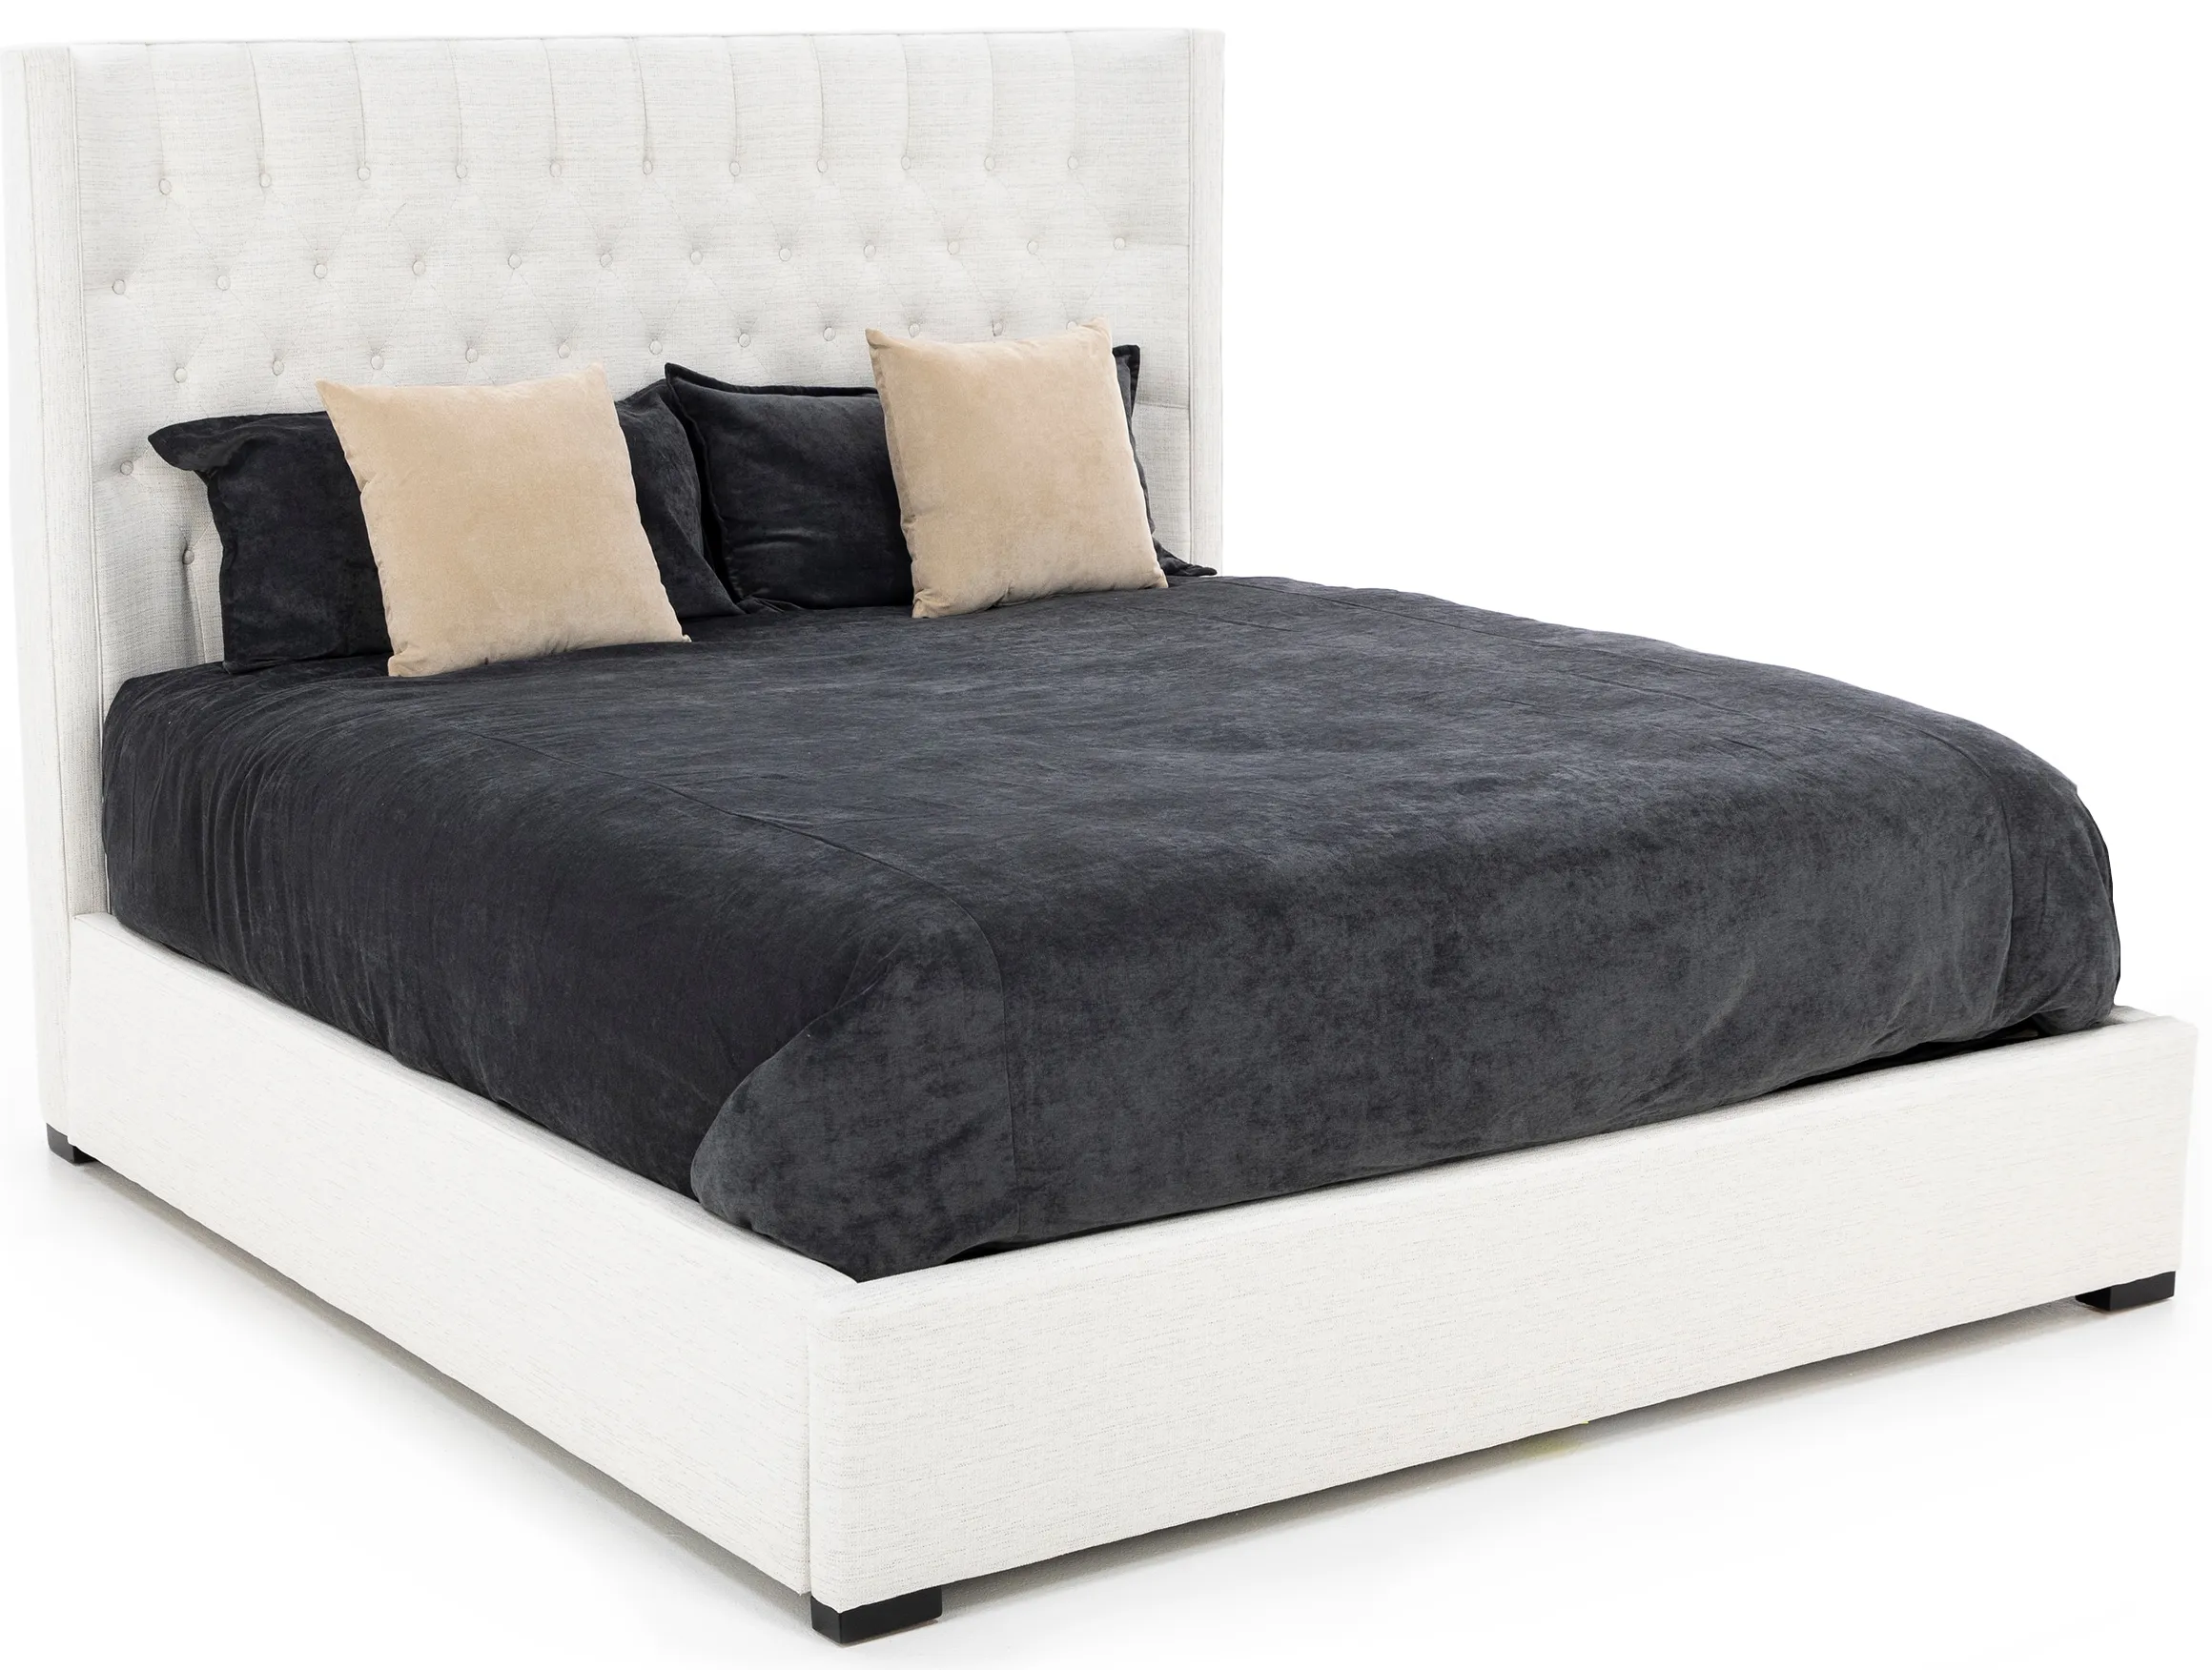 Carly Queen Upholstered Bed